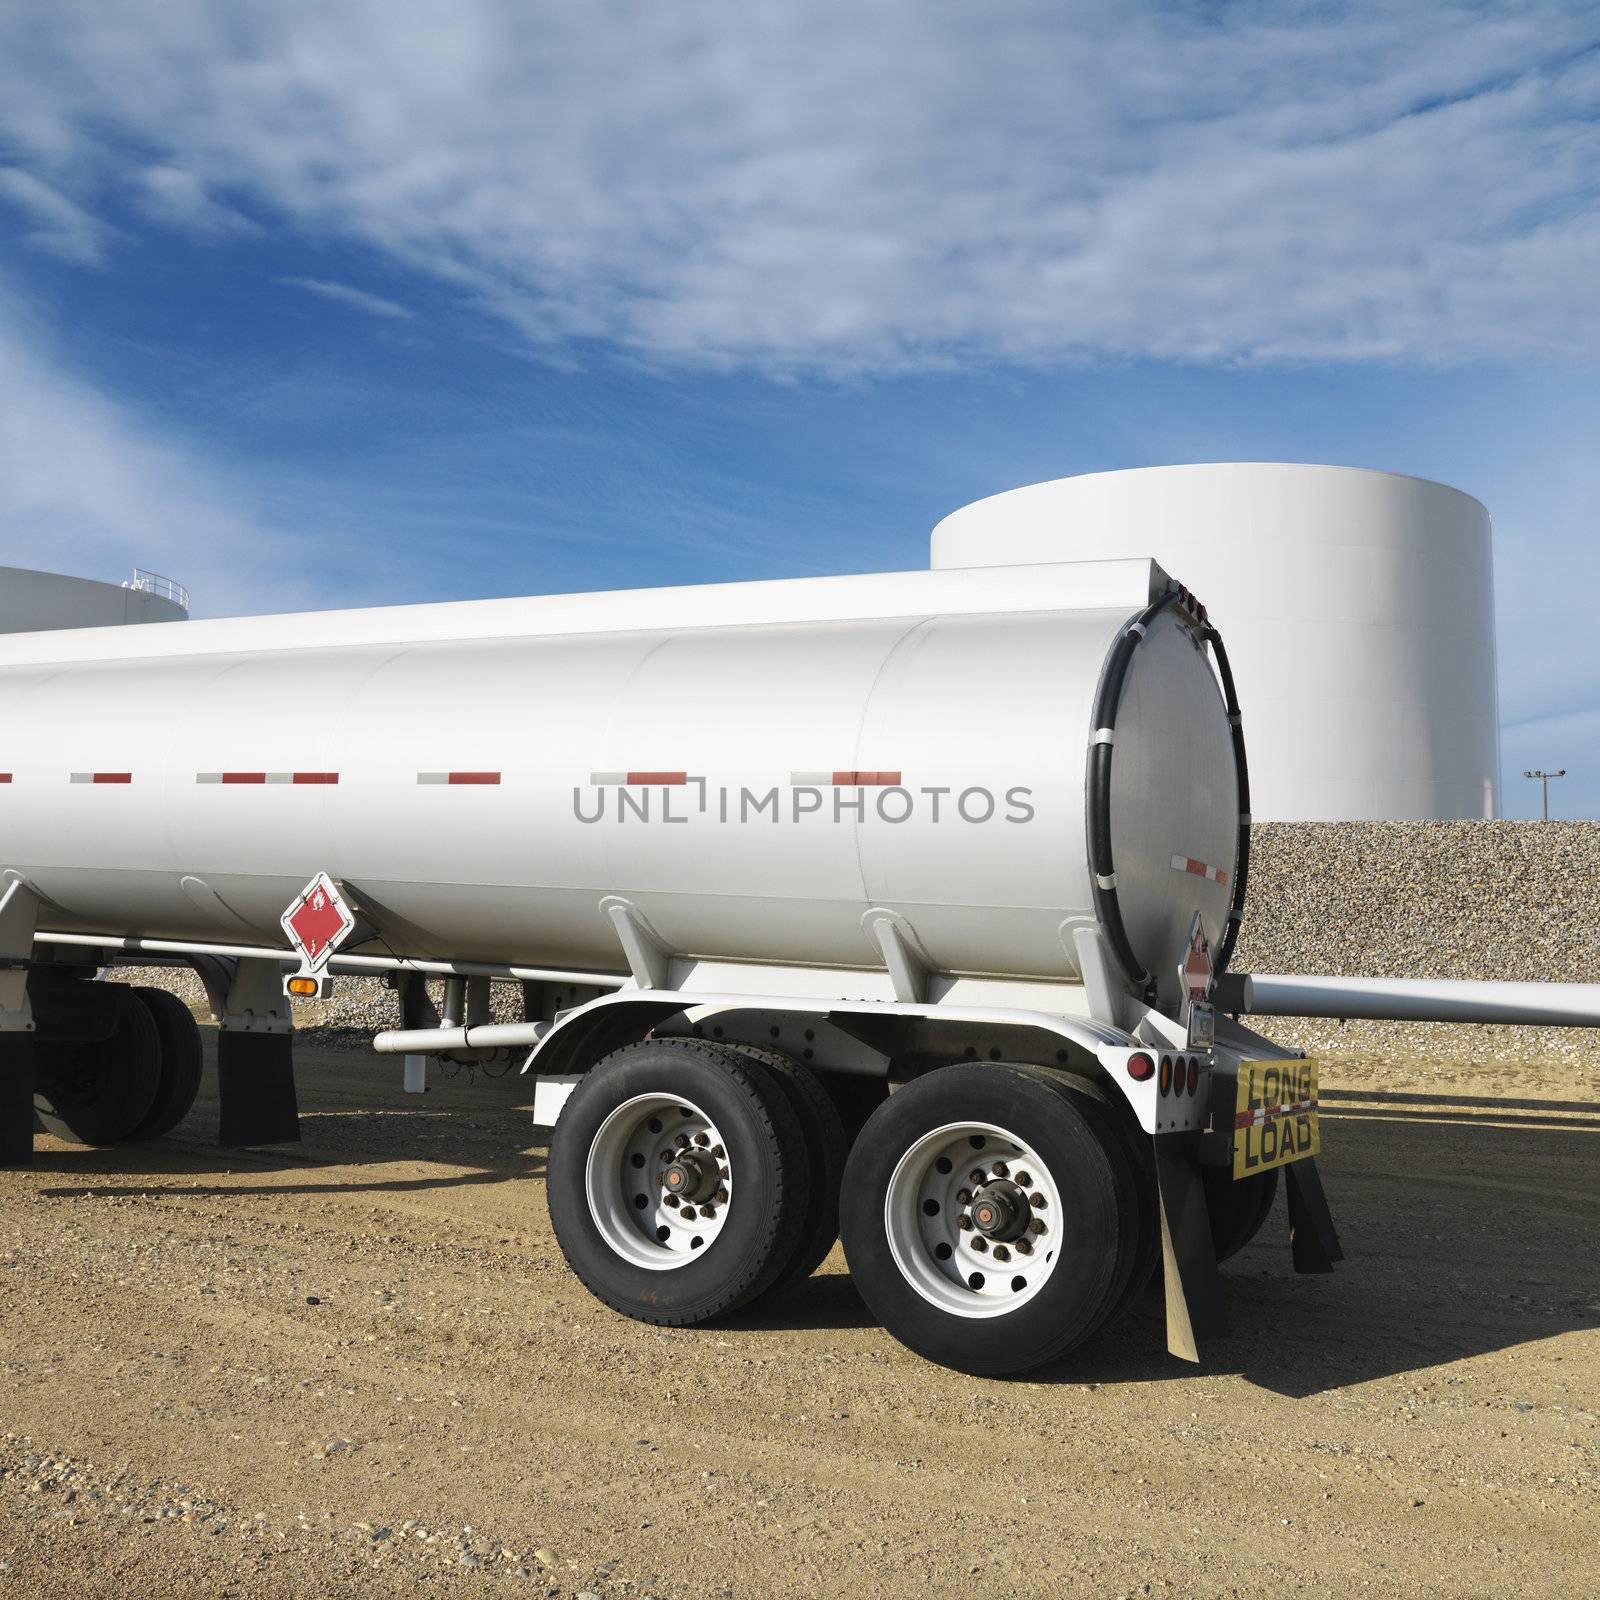 Side view of fuel tanker truck with fuel tank farm in background.